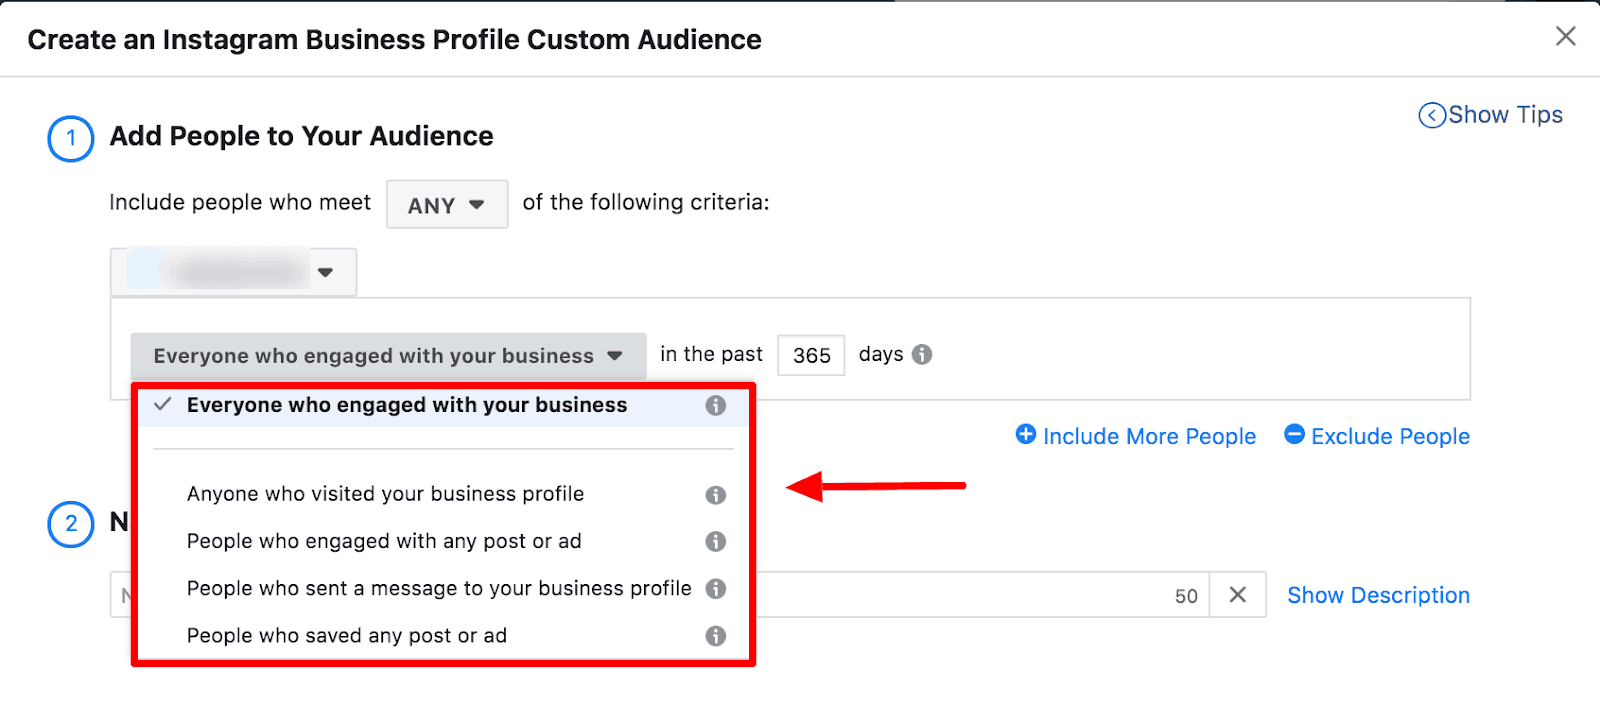 Screenshot showing how to create an Instagram Business Profile custom audience. 